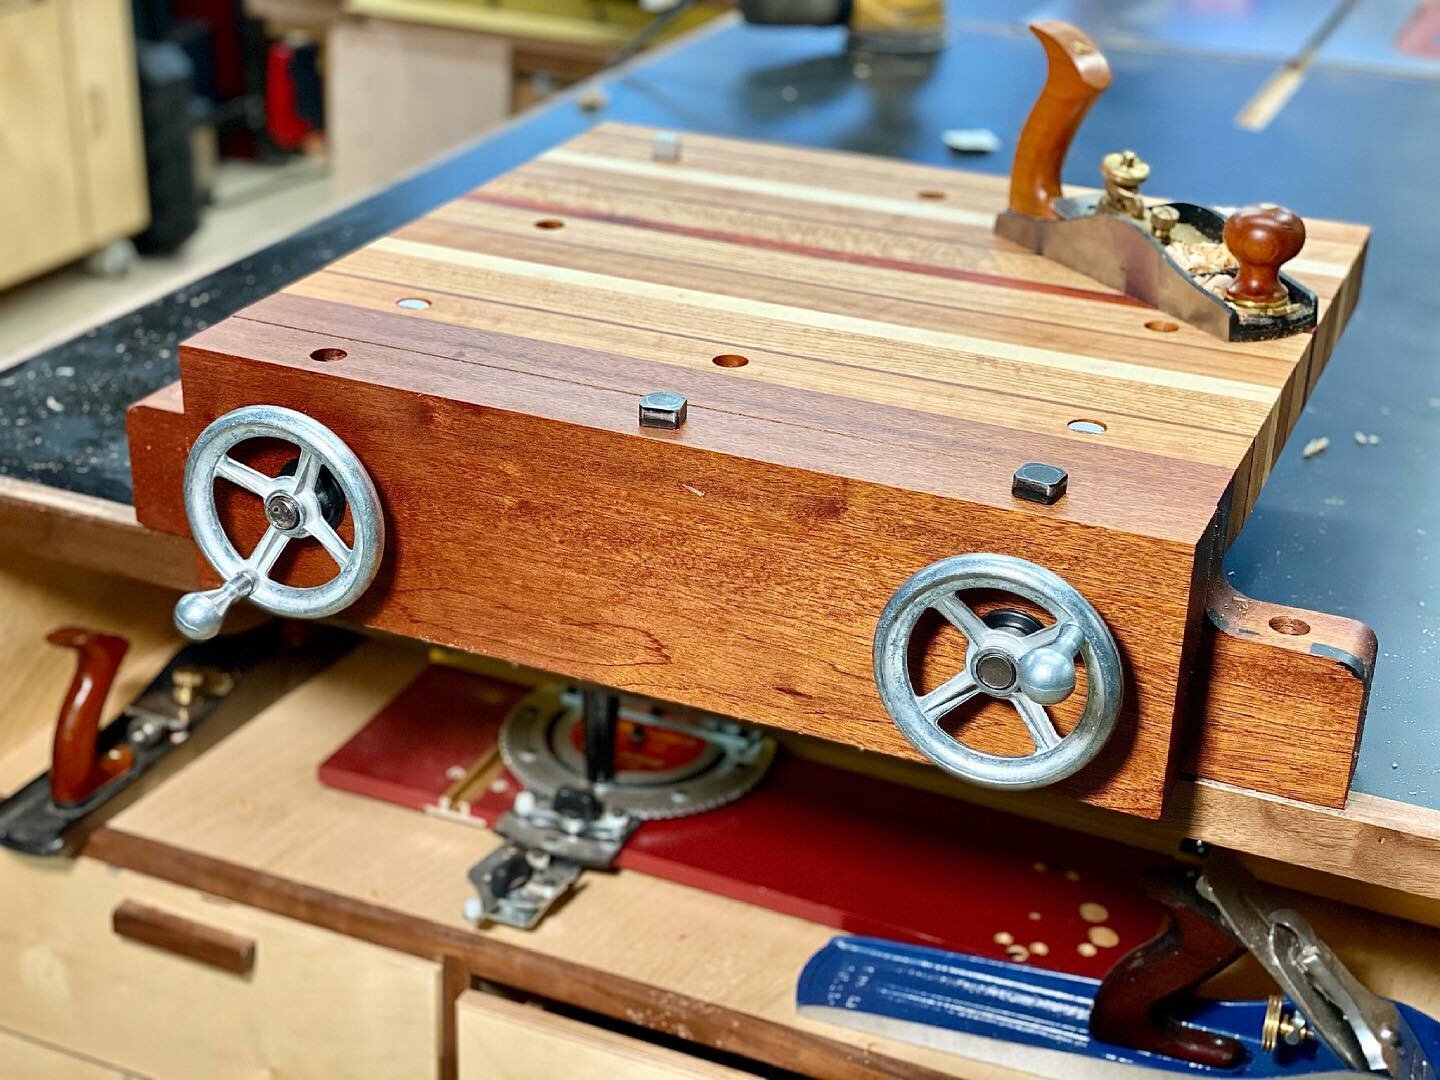 Finished this project today - it will be a huge upgrade from my terrible (and broke ) Moxon vise on my Harbor Freight workbench.  This was made mostly from scraps from other projects... there&rsquo;s a reason I waste so much space hoarding offcuts.  